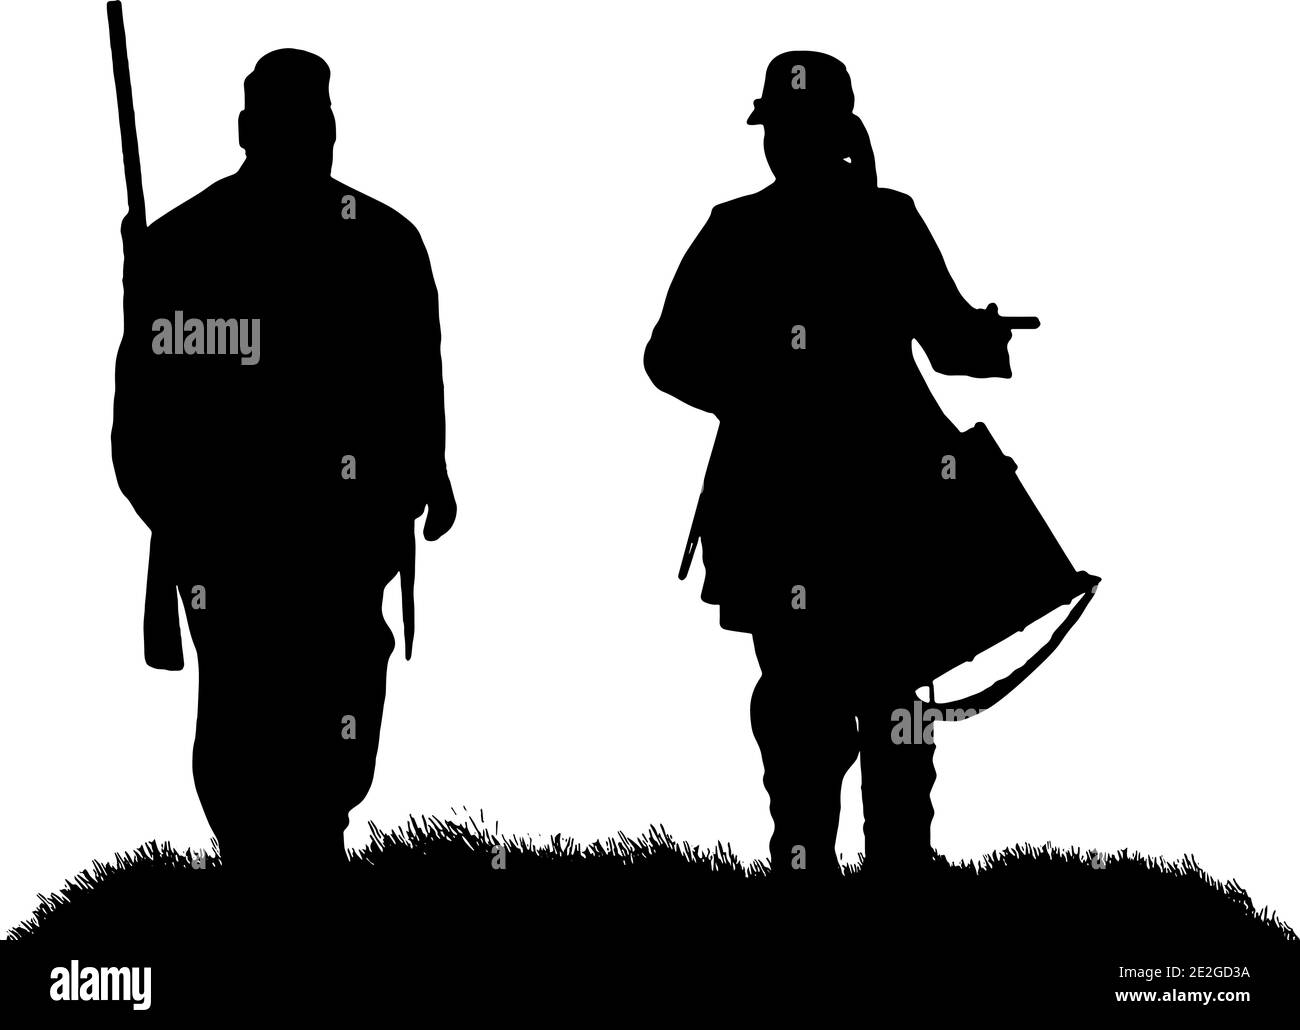 American civil war soldier and drummer boy silhouette in black on white background, vector graphic Stock Vector